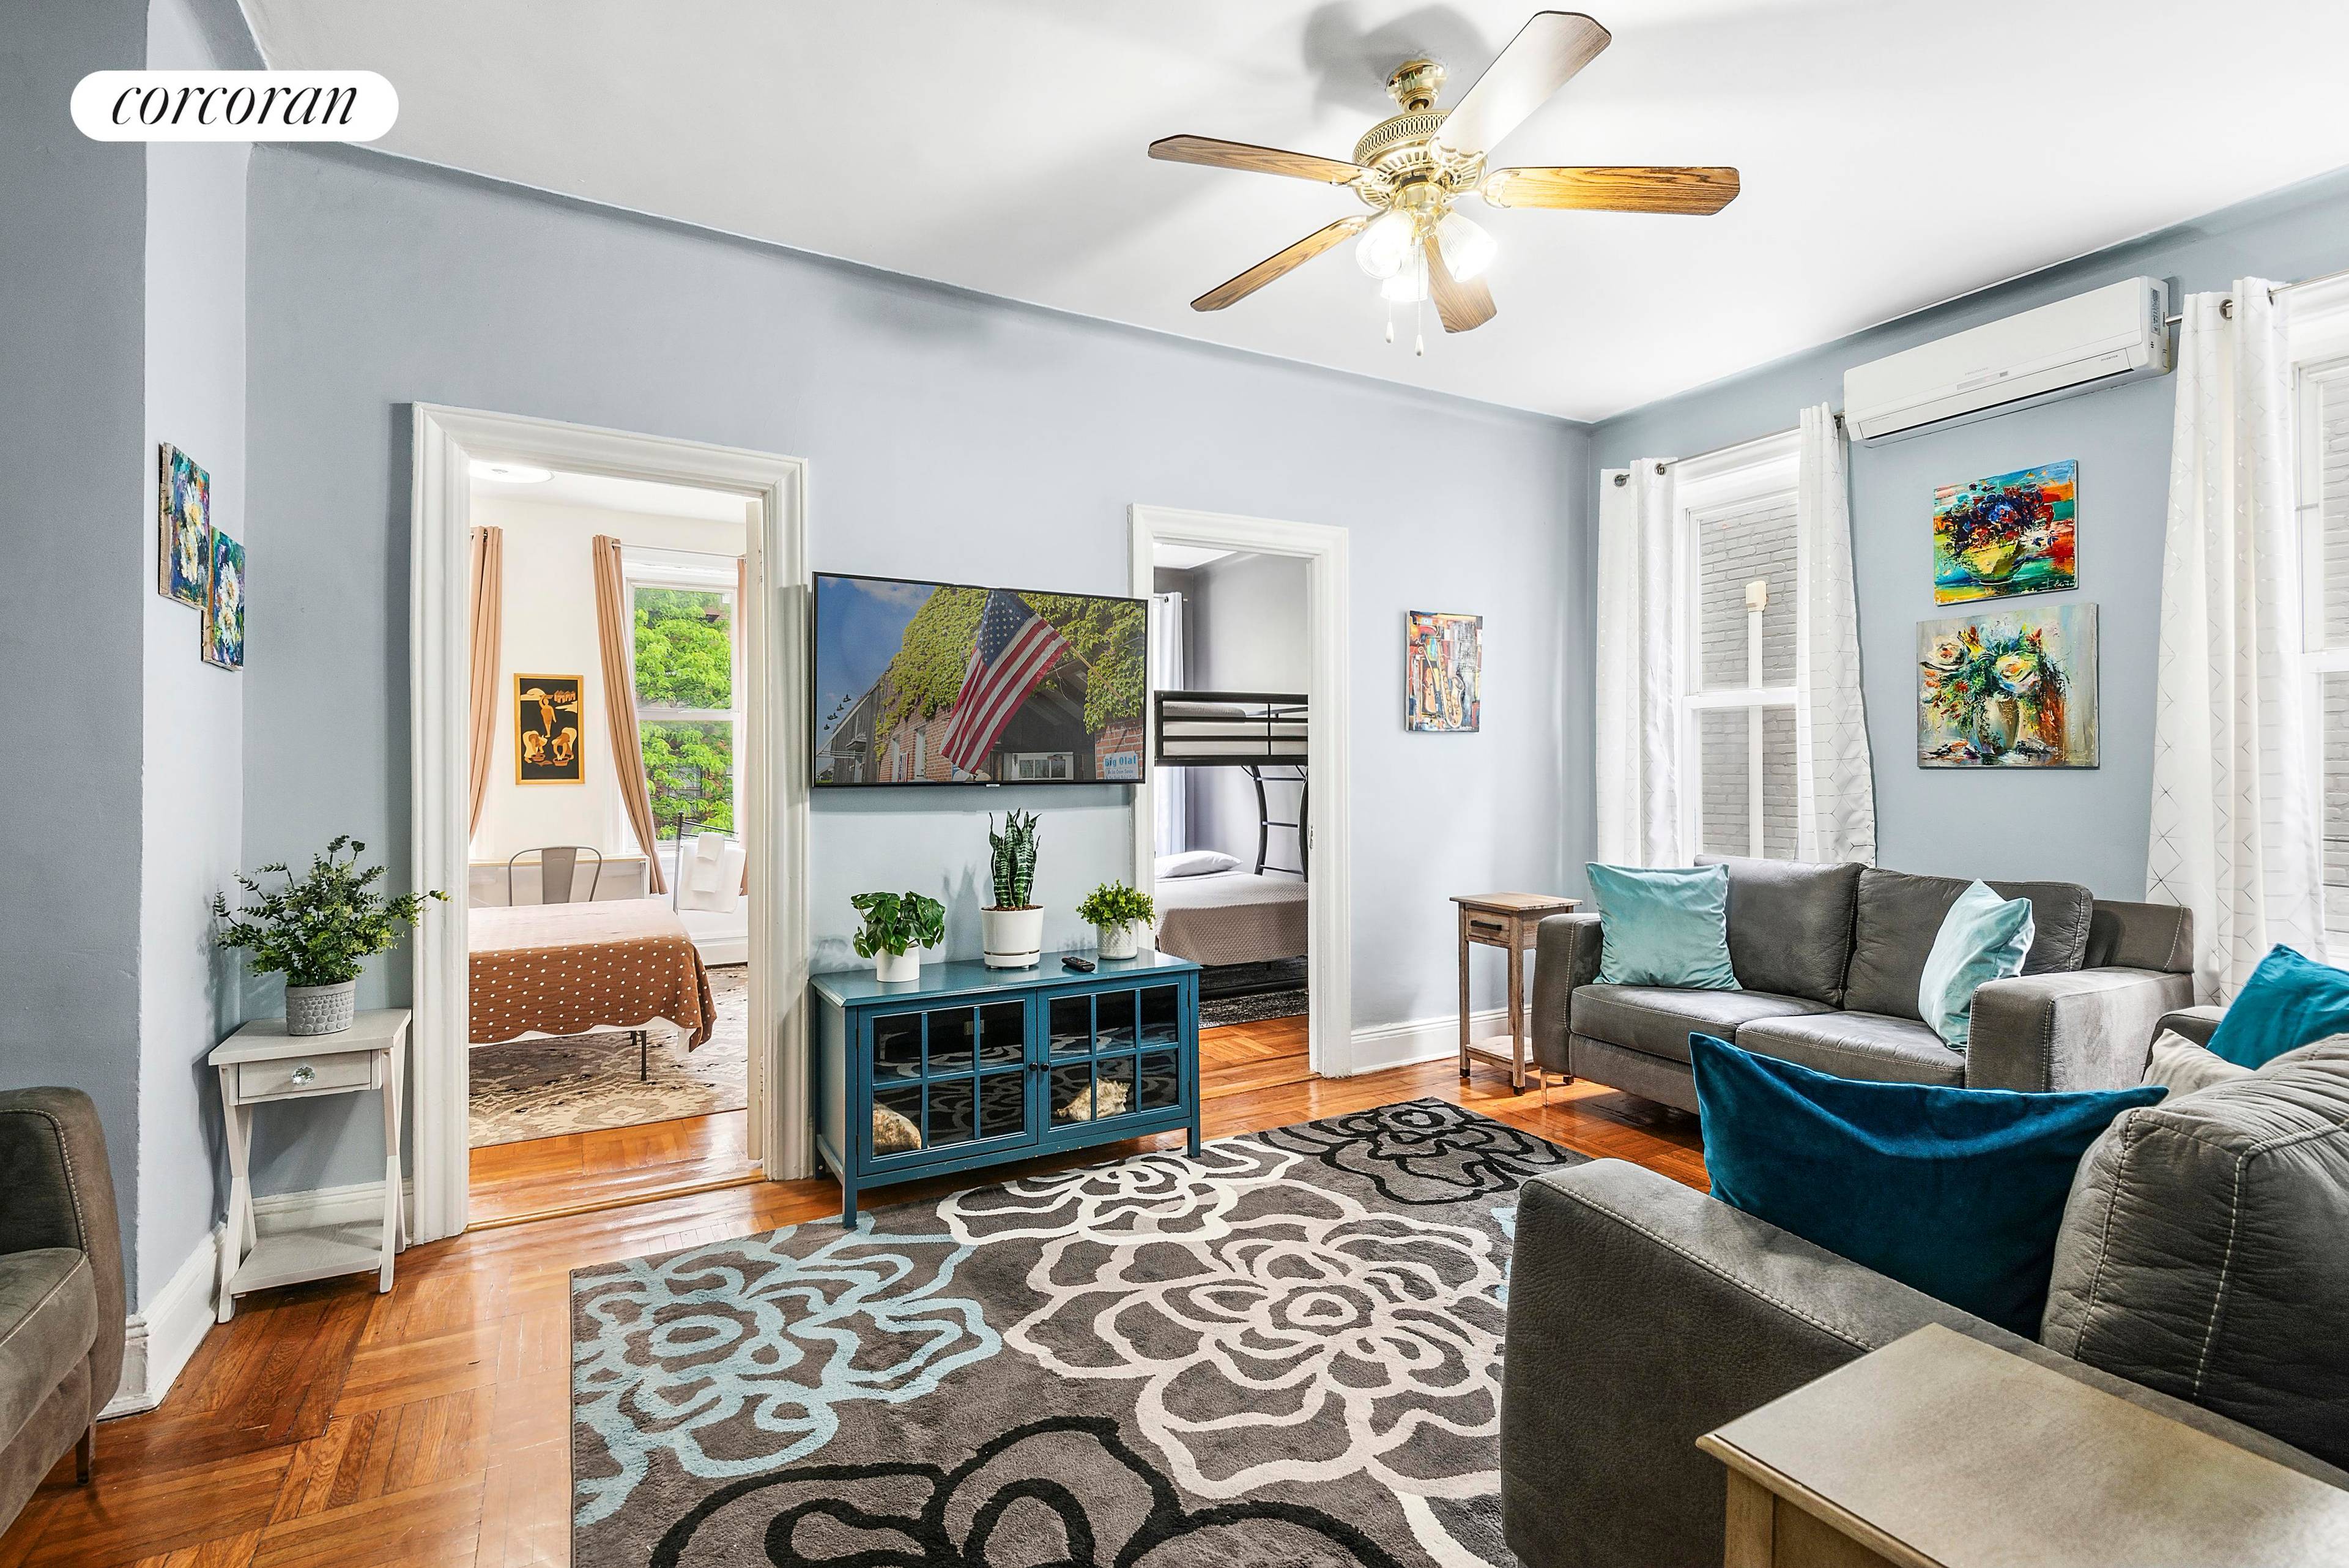 Furnished real 2br with sunny exposures amp ; washer dryer3 month minimumJust one block to the Botanical Gardens amp ; near 2 3 4 5 trainsBeautifully appointed furnished two bedroom ...